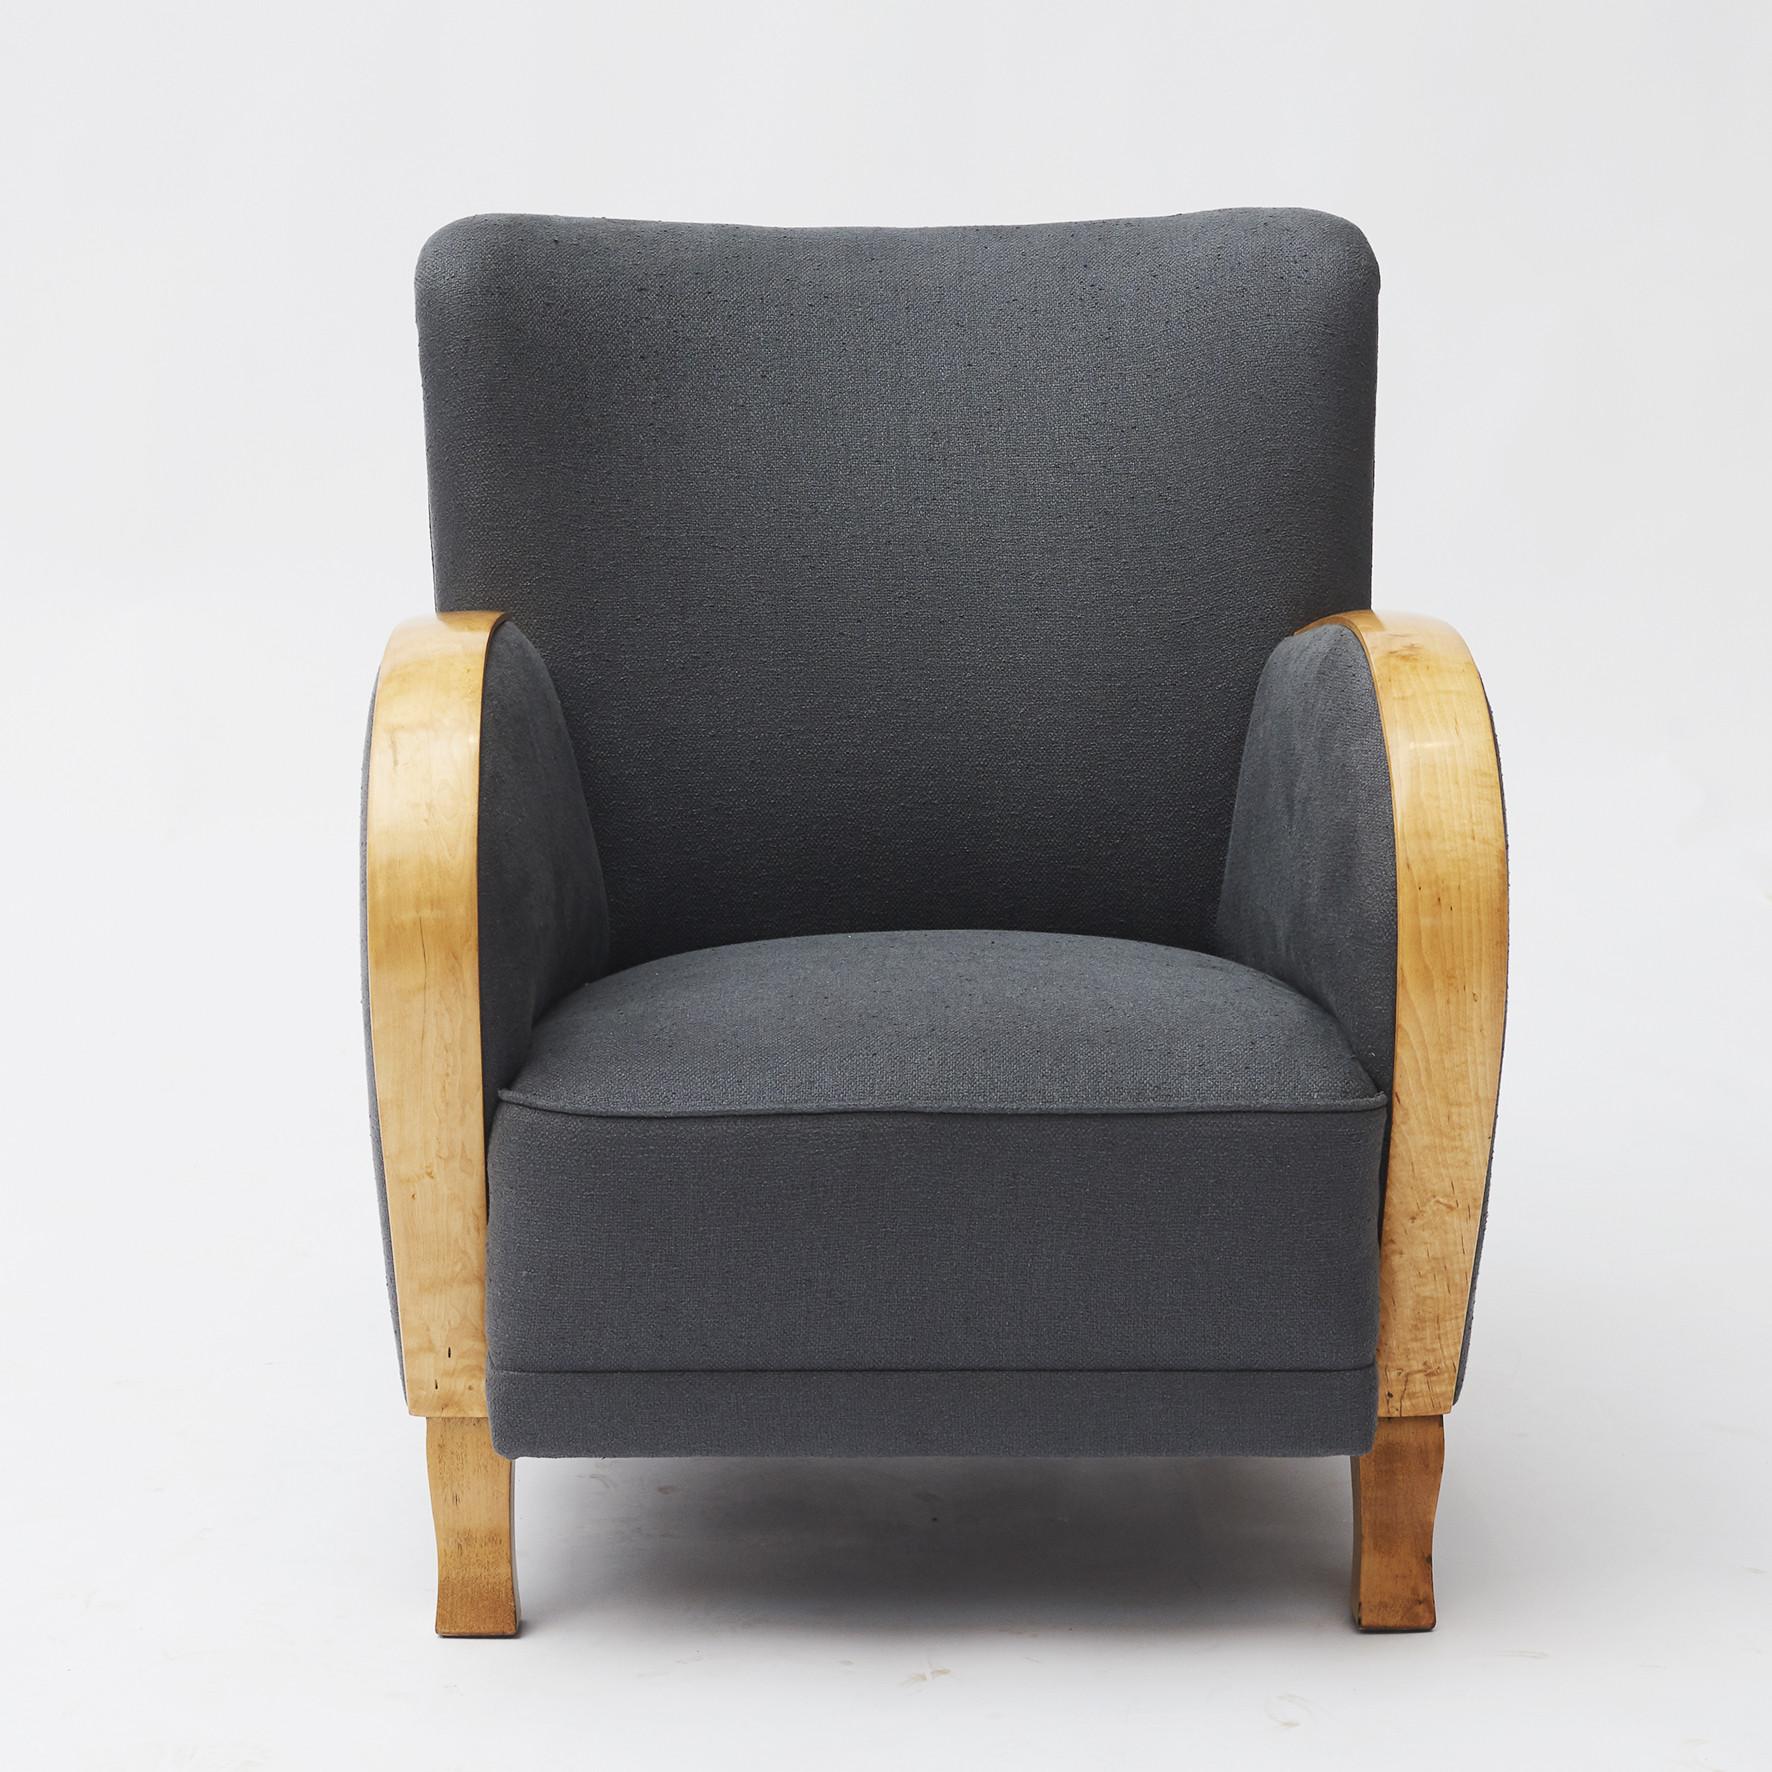 Pair of Swedish Art Deco easy chairs. Armrest and legs in birch wood, seat with springs.
Newly upholstered in petroleum grey linen-blend fabric from Pierre Frey.
Sweden, circa 1930.
Sold as a pair.